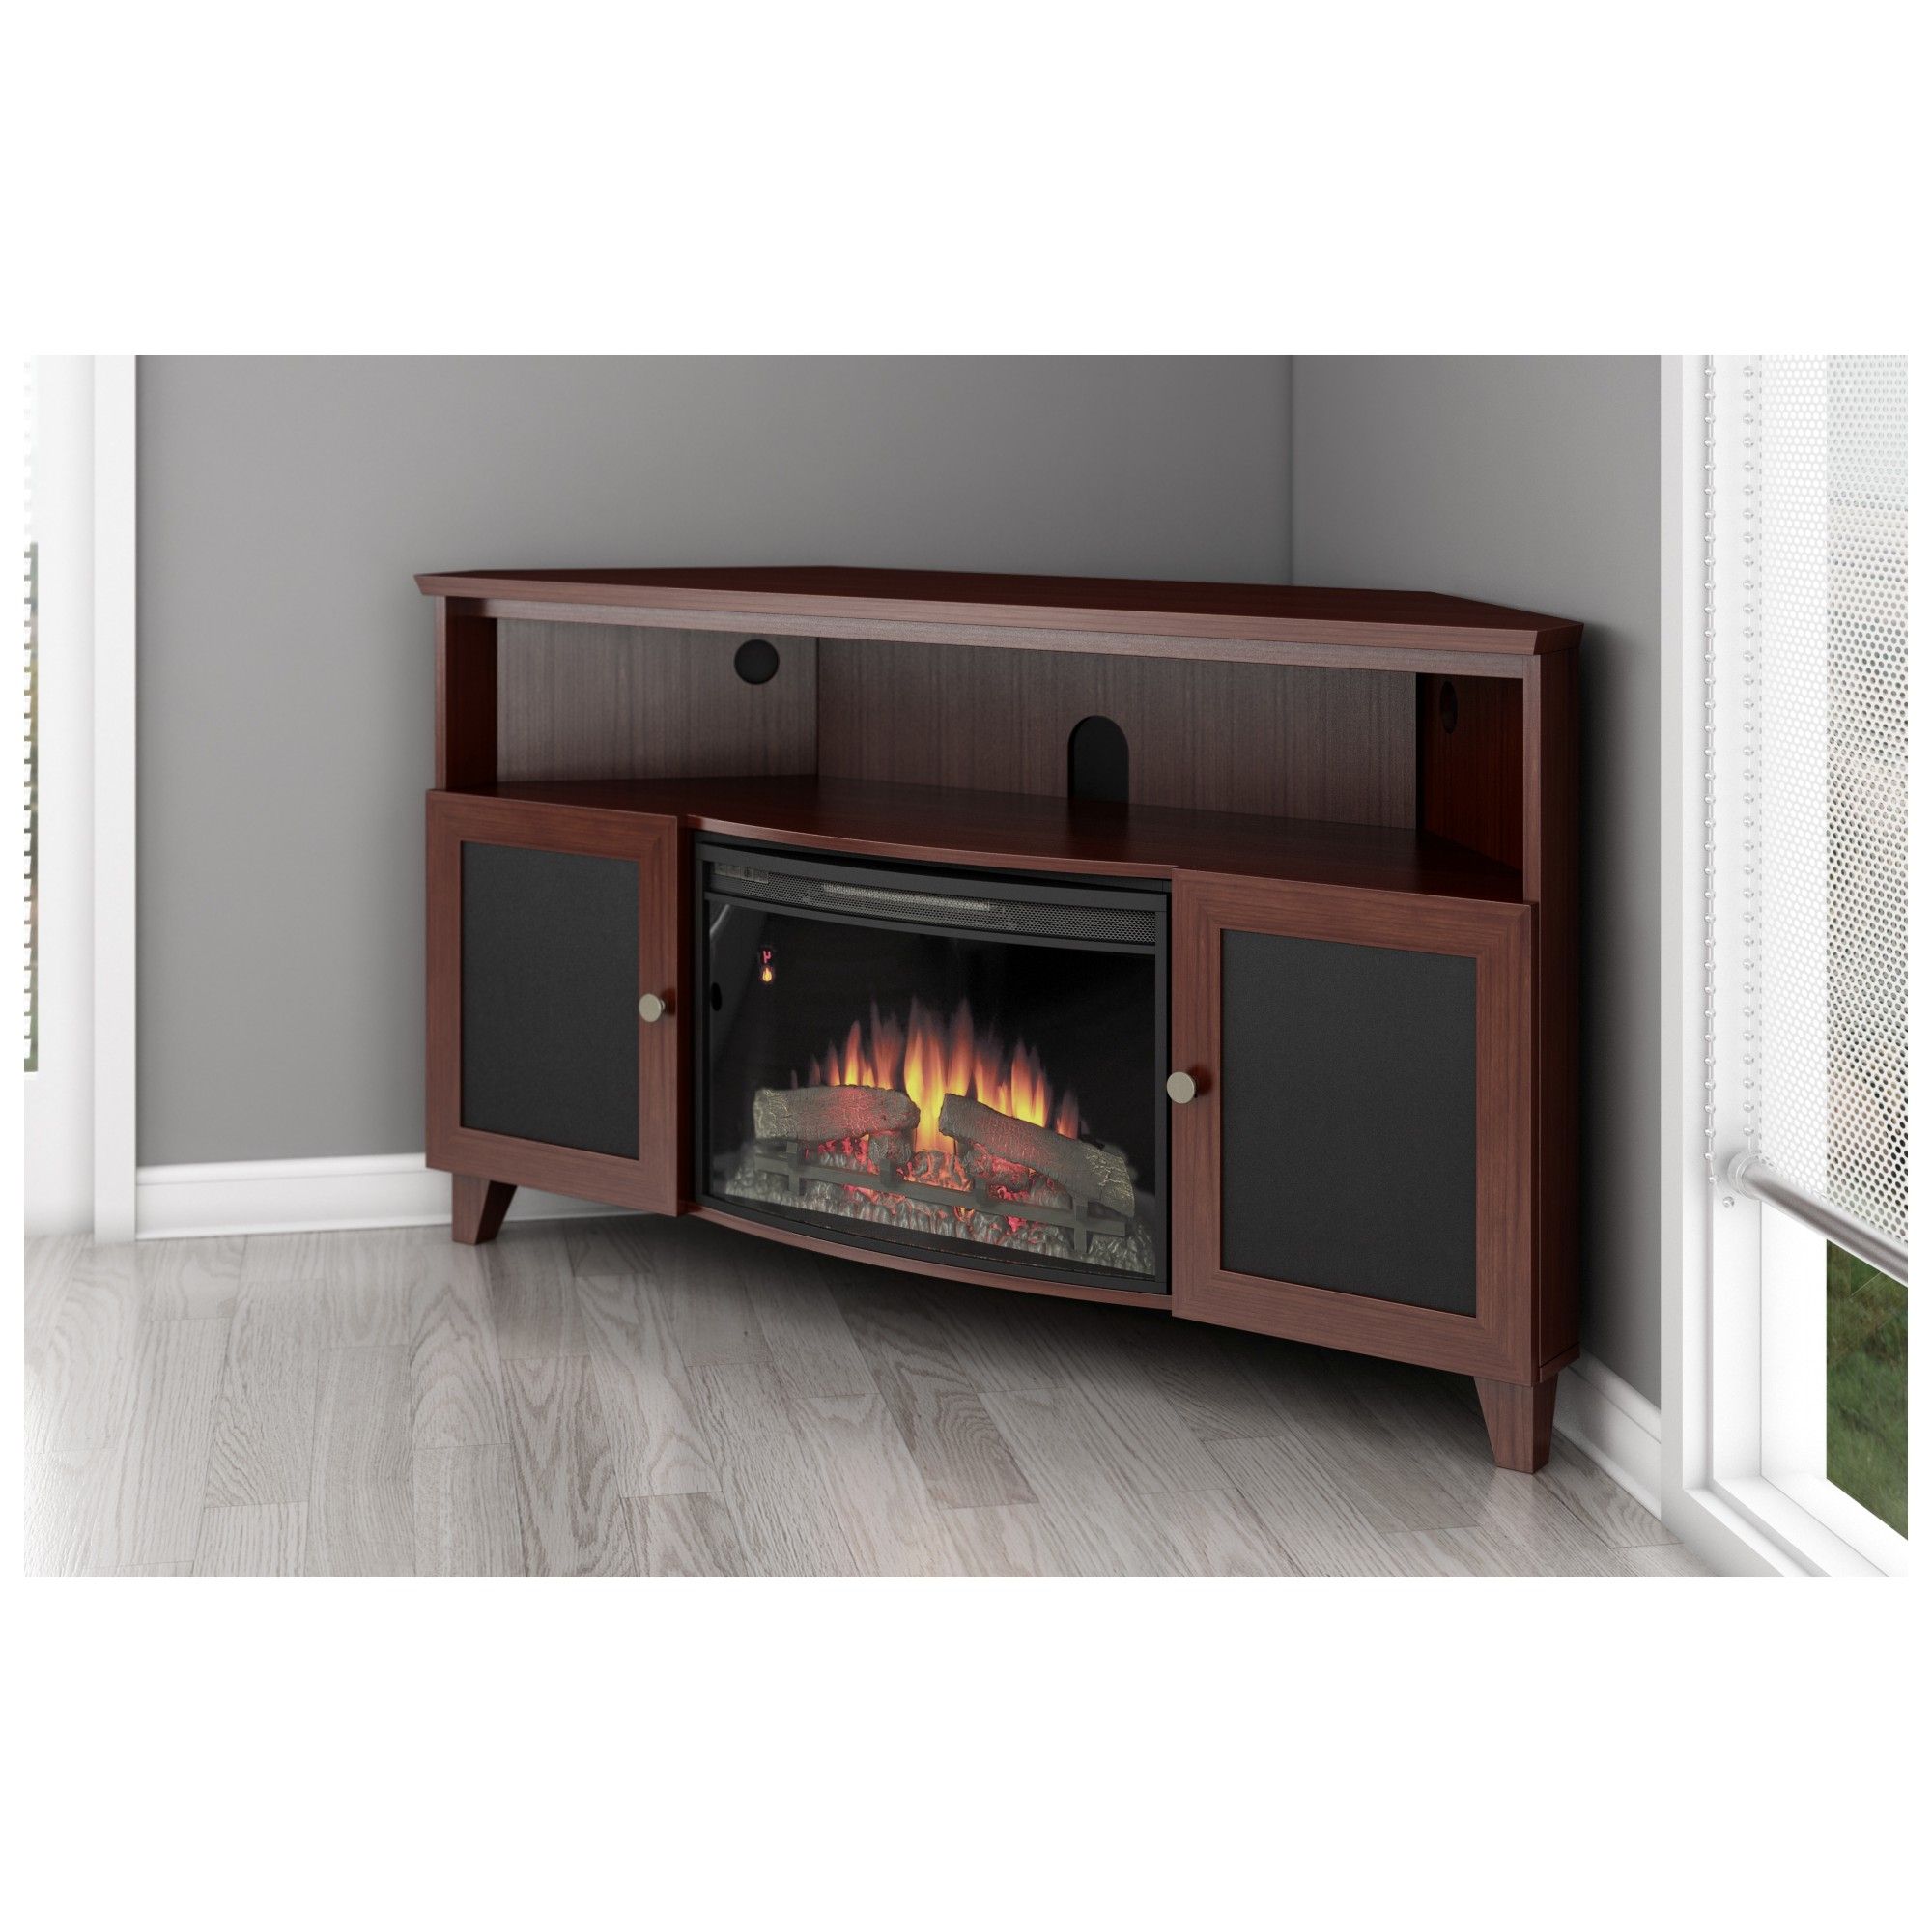 Favorite Cherry Tv Stands With Regard To Solid Oak Tv Stands For Flat Screen Leick Westwood Cherry Hardwood (View 19 of 20)